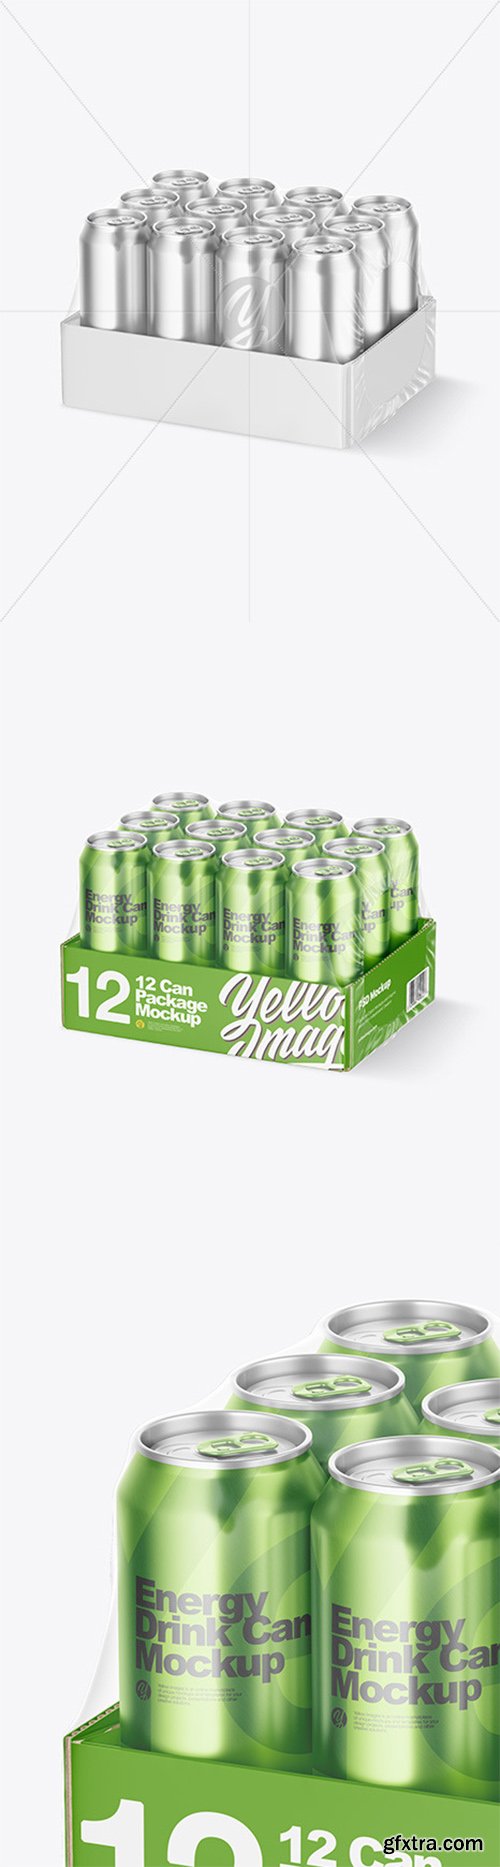 Transparent Pack with 12 Metallic Cans Mockup 63755